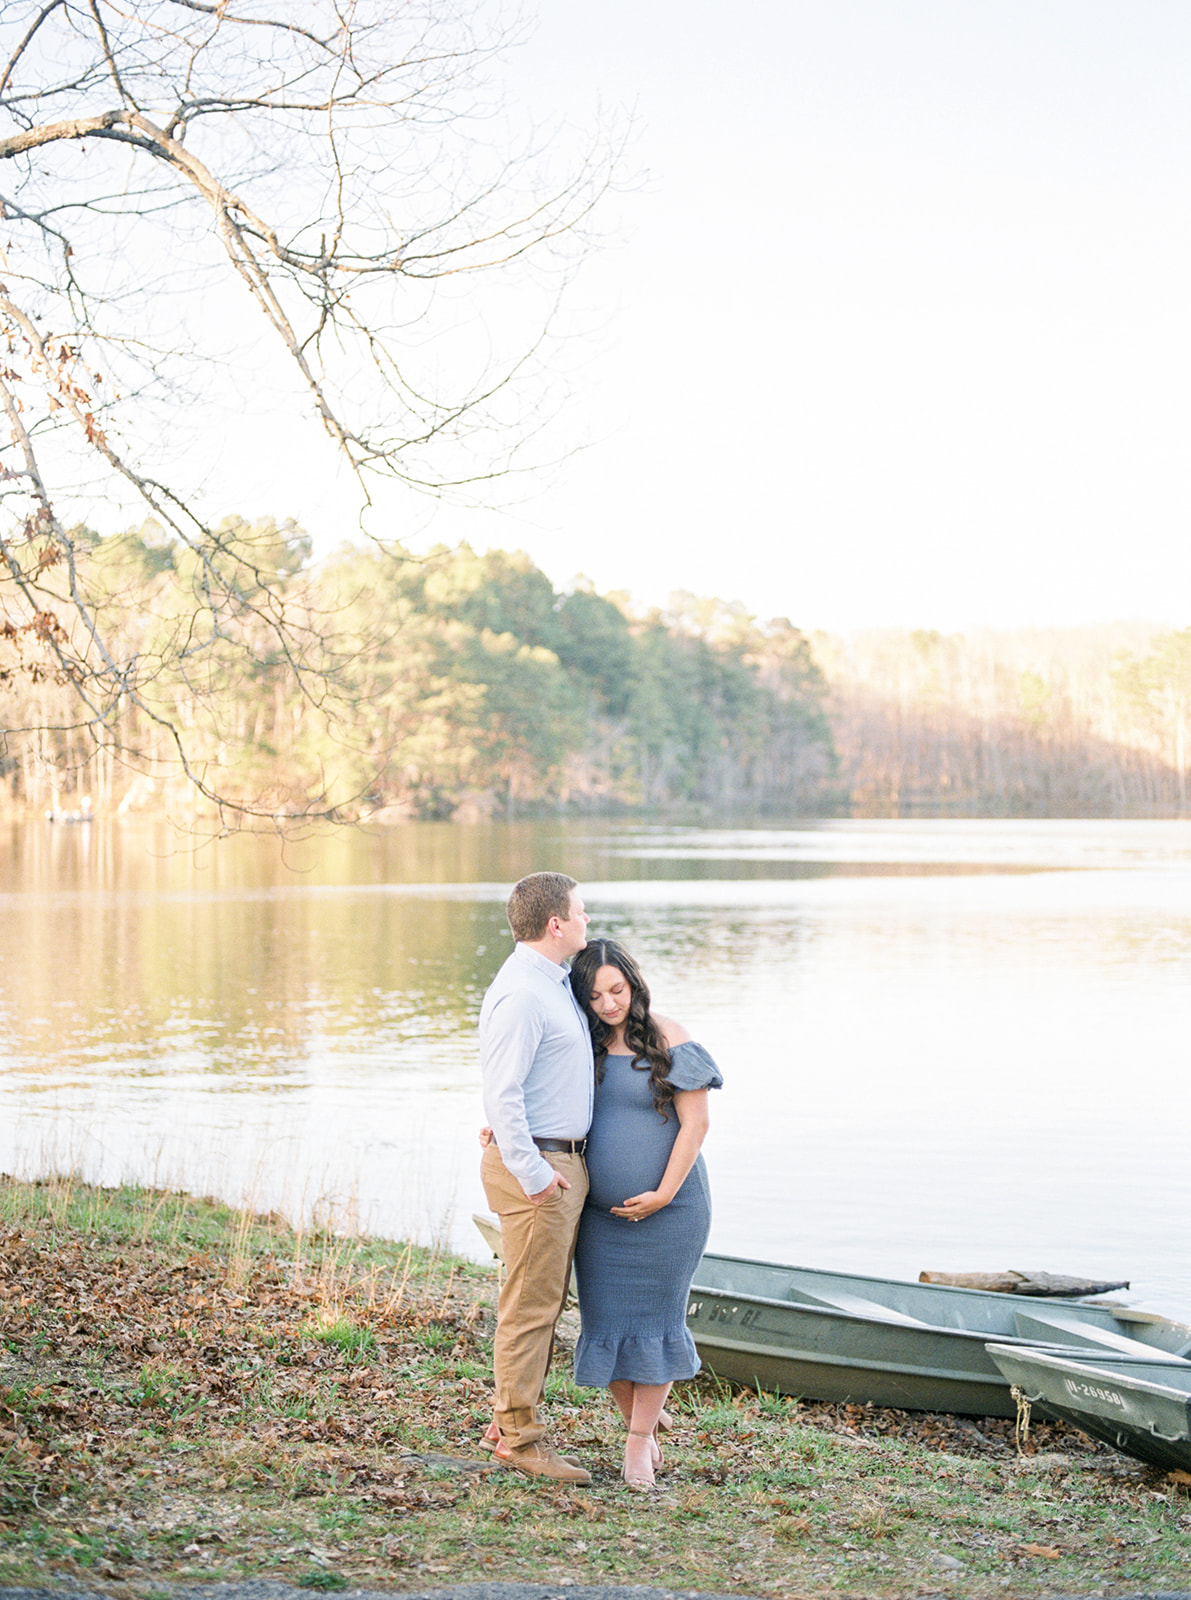 Husband and wife embrace in front of DeKalb County Lake during intimate maternity photography session